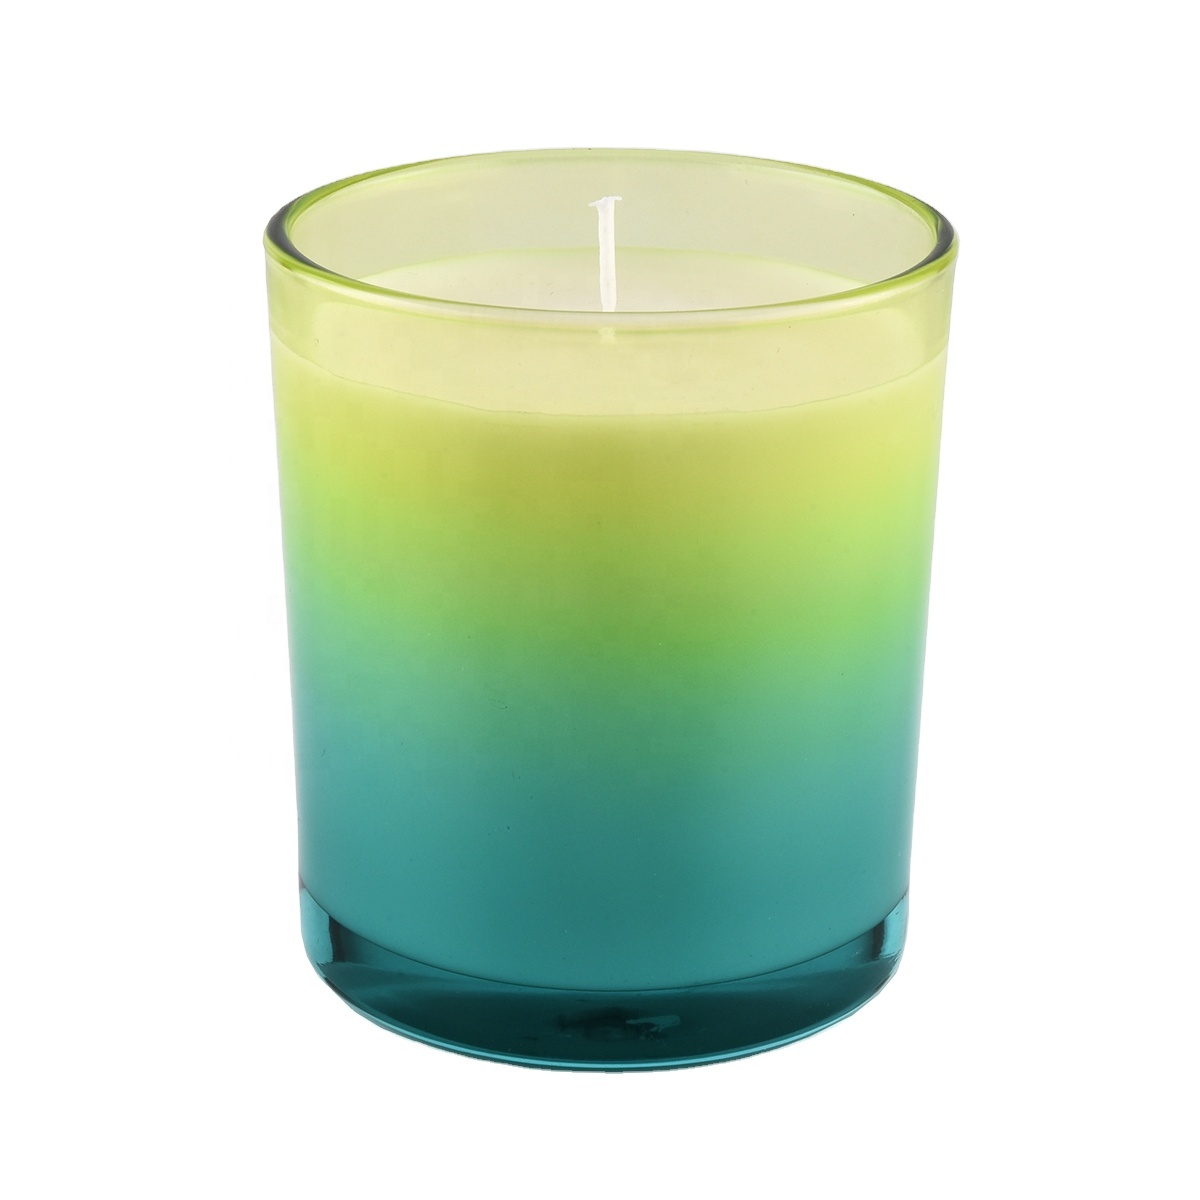 Luxury apothecary scented soy wax candle jar glass gradient candle holders